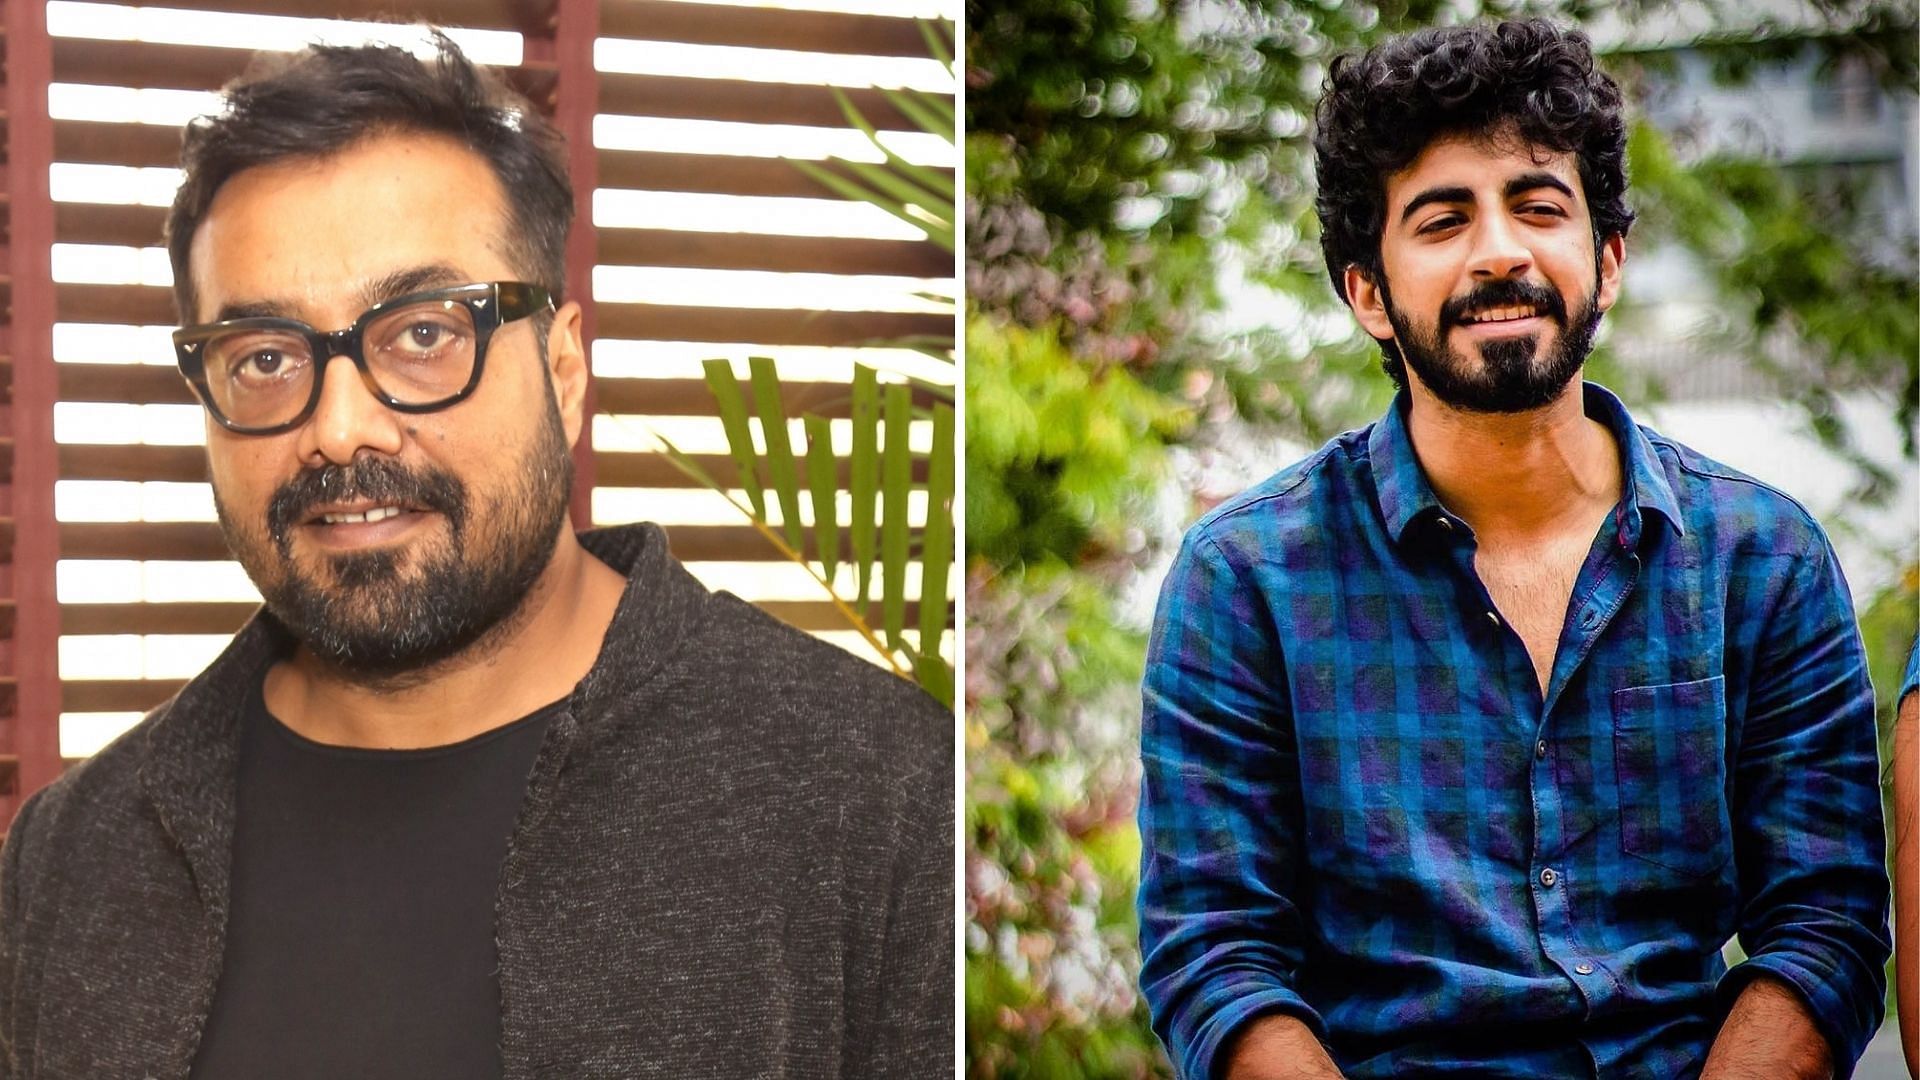 Anurag Kashyap has reportedly cast Malayalam actor Roshan Mathew in his next film.